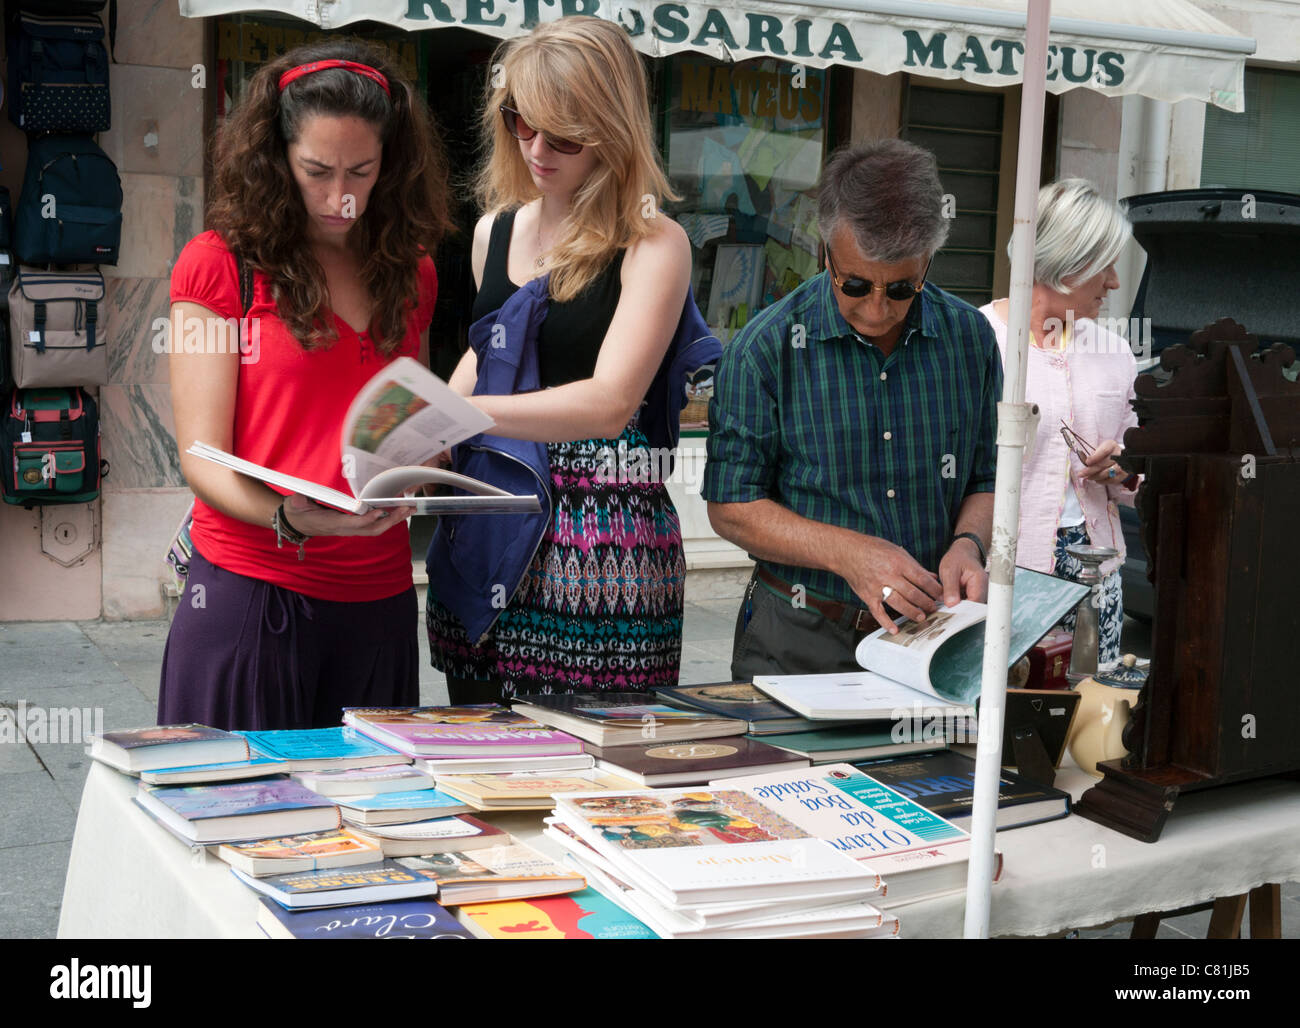 People inspecting books at a flea market, held on the last Saturday of the month, in Praça do Comércio, Coimbra, Portugal. Stock Photo